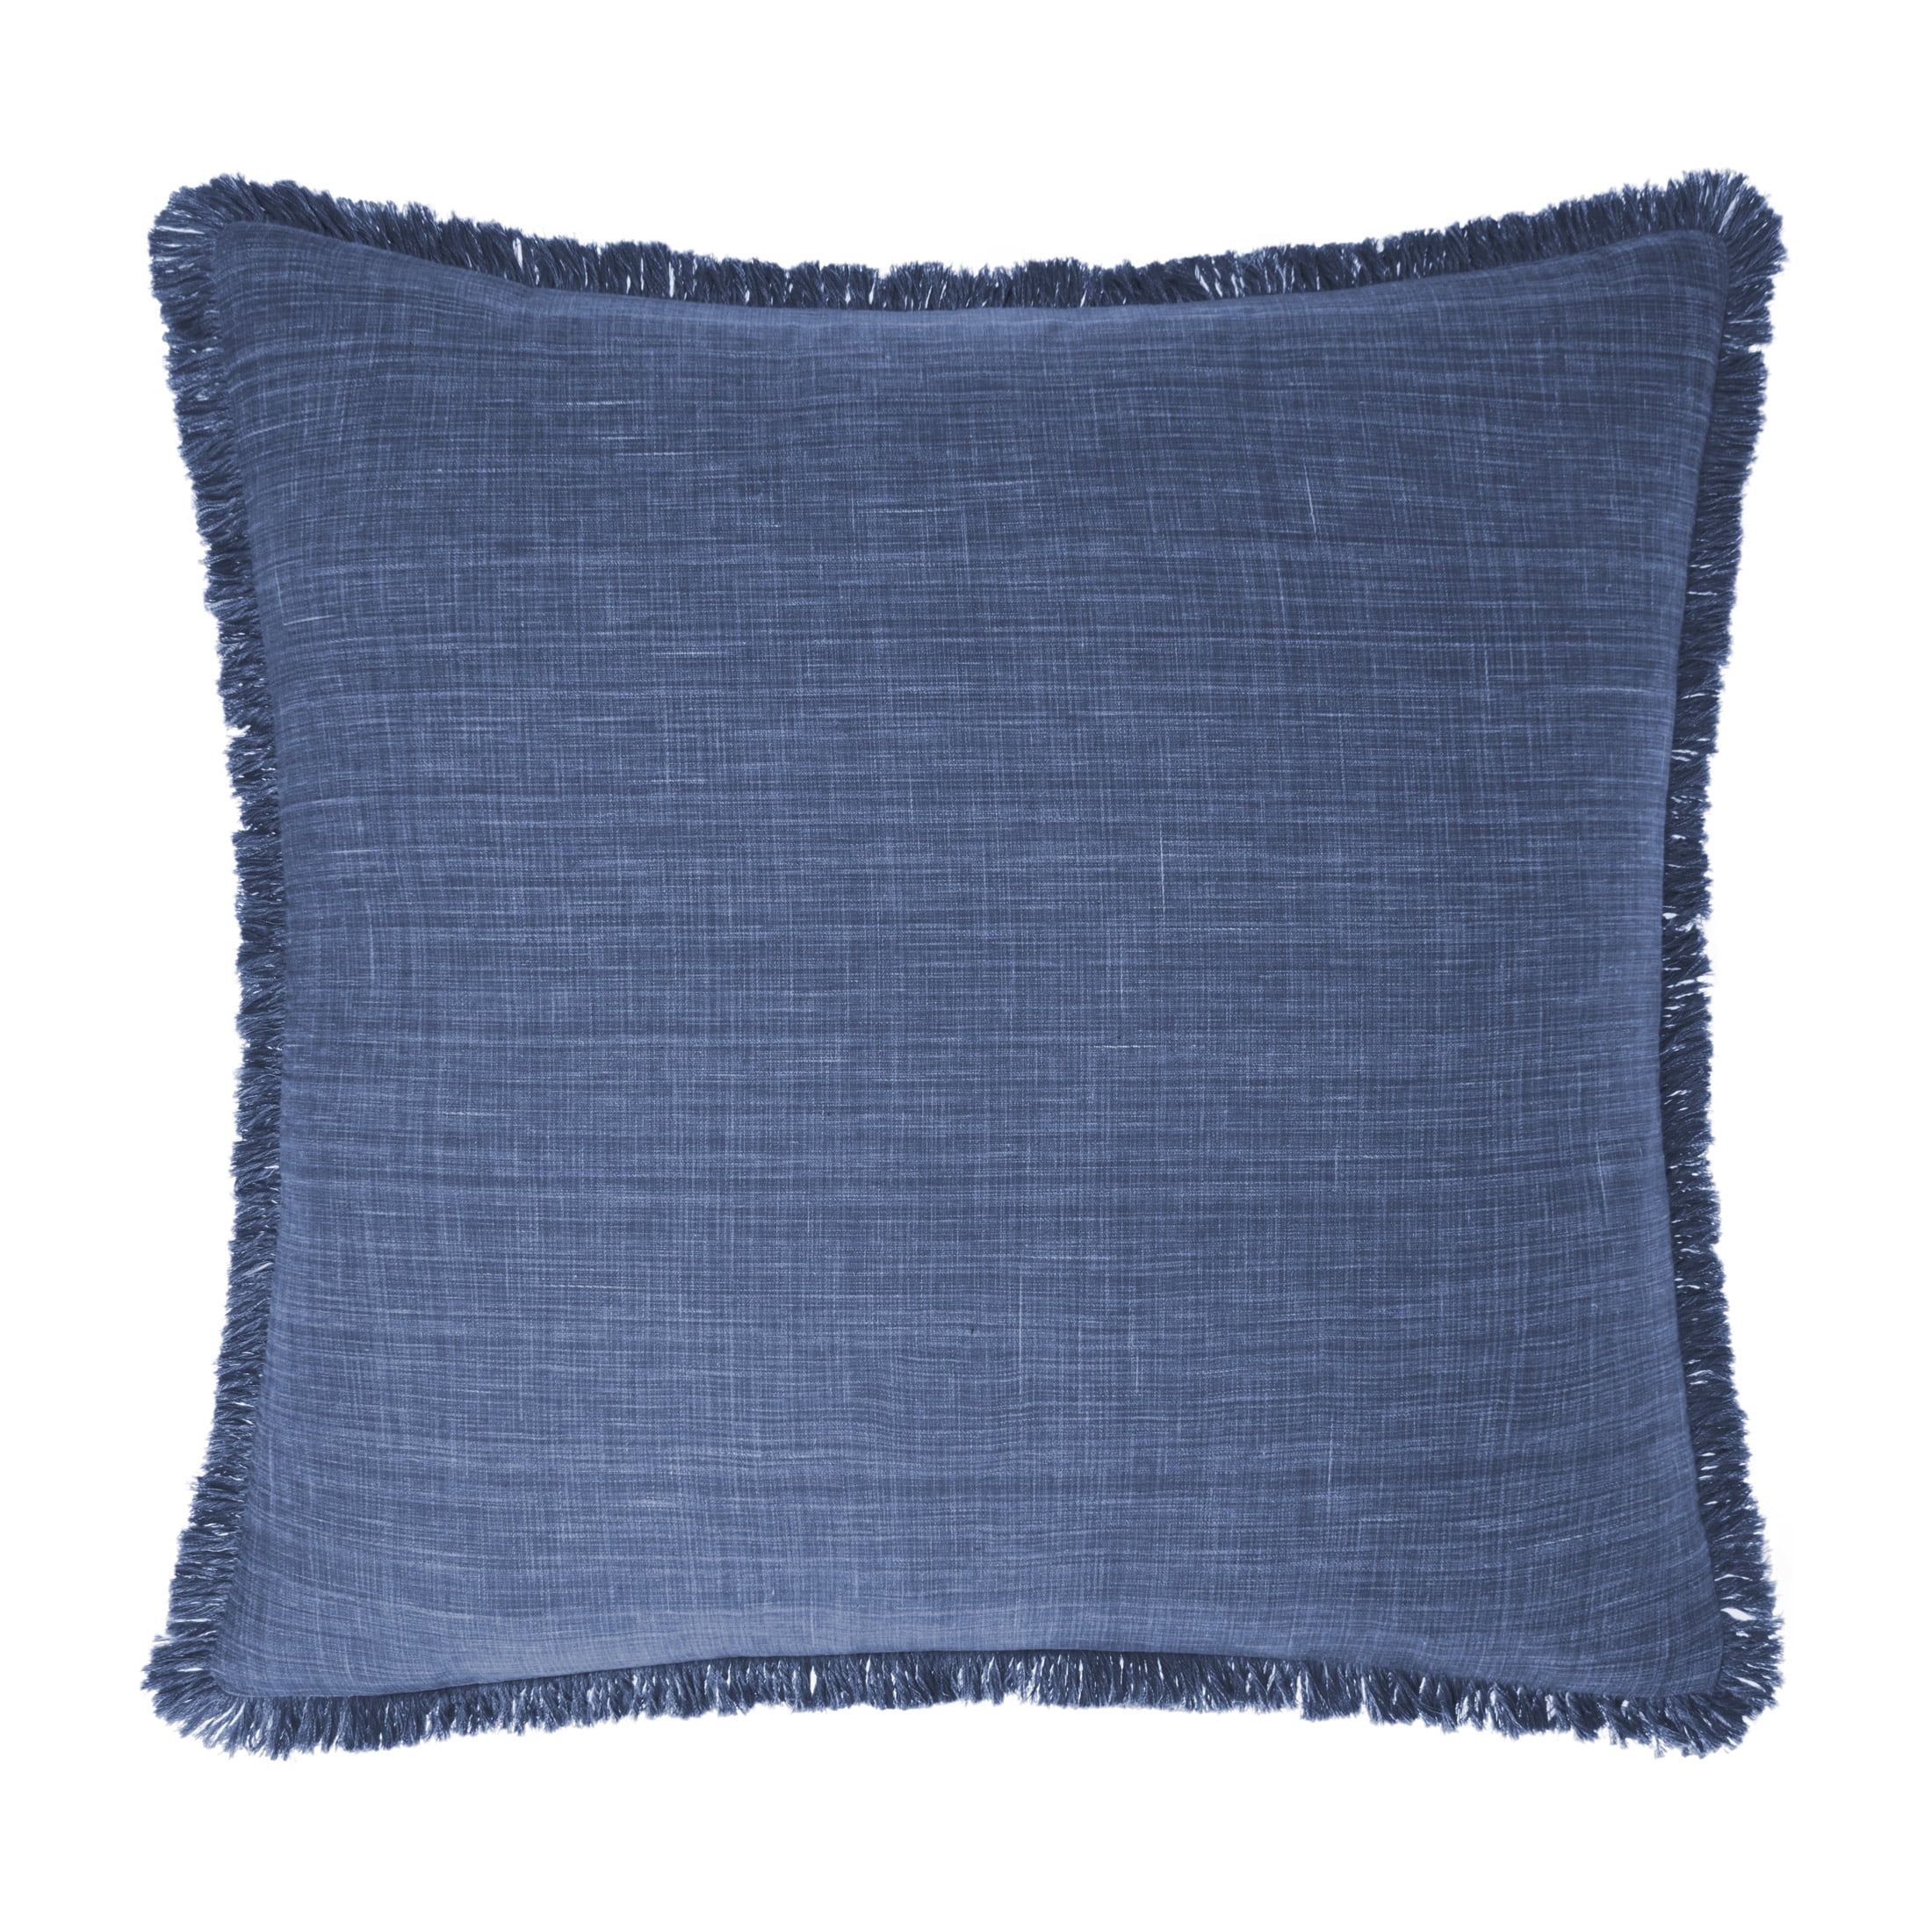 Gap Home Cross-Hatch Decorative Square Throw Pillow with Frayed Edge Navy 22" x 22" | Walmart (US)